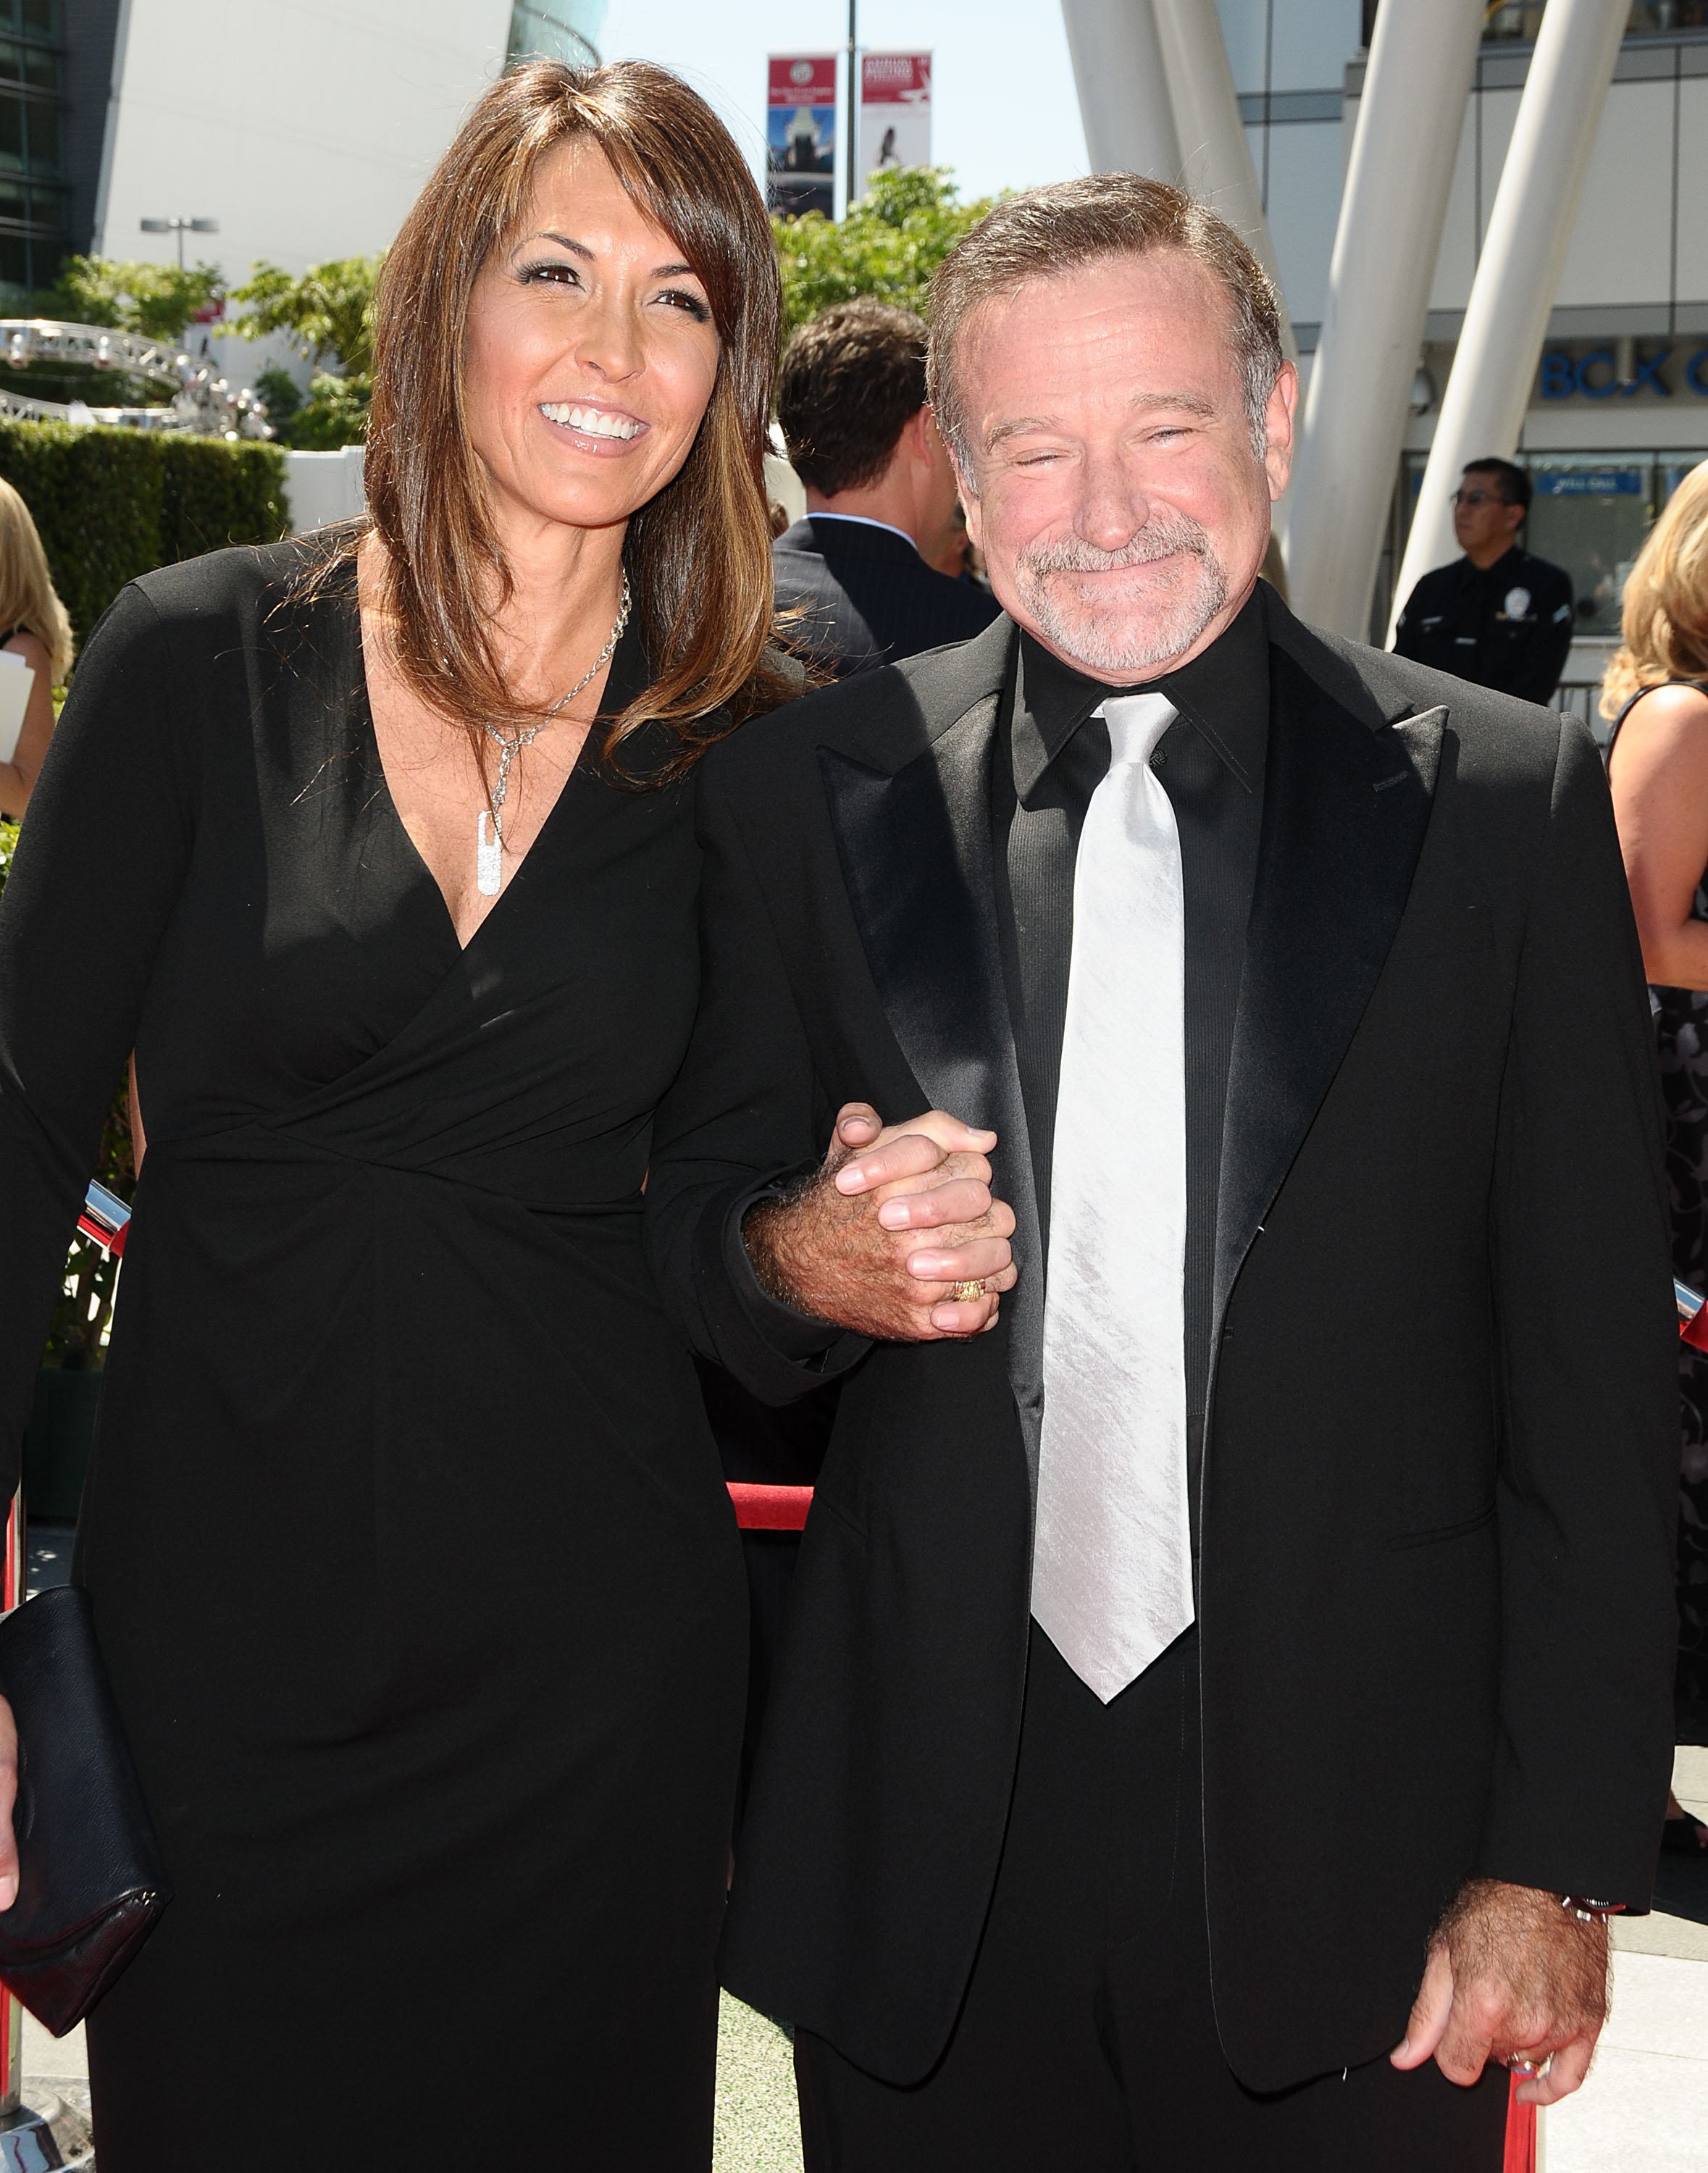  Robin Williams and Susan Schneider attend the 2010 Creative Arts Emmy Awards at Nokia Plaza L.A. LIVE on August 21, 2010 in Los Angeles, California. | Source: Getty Images